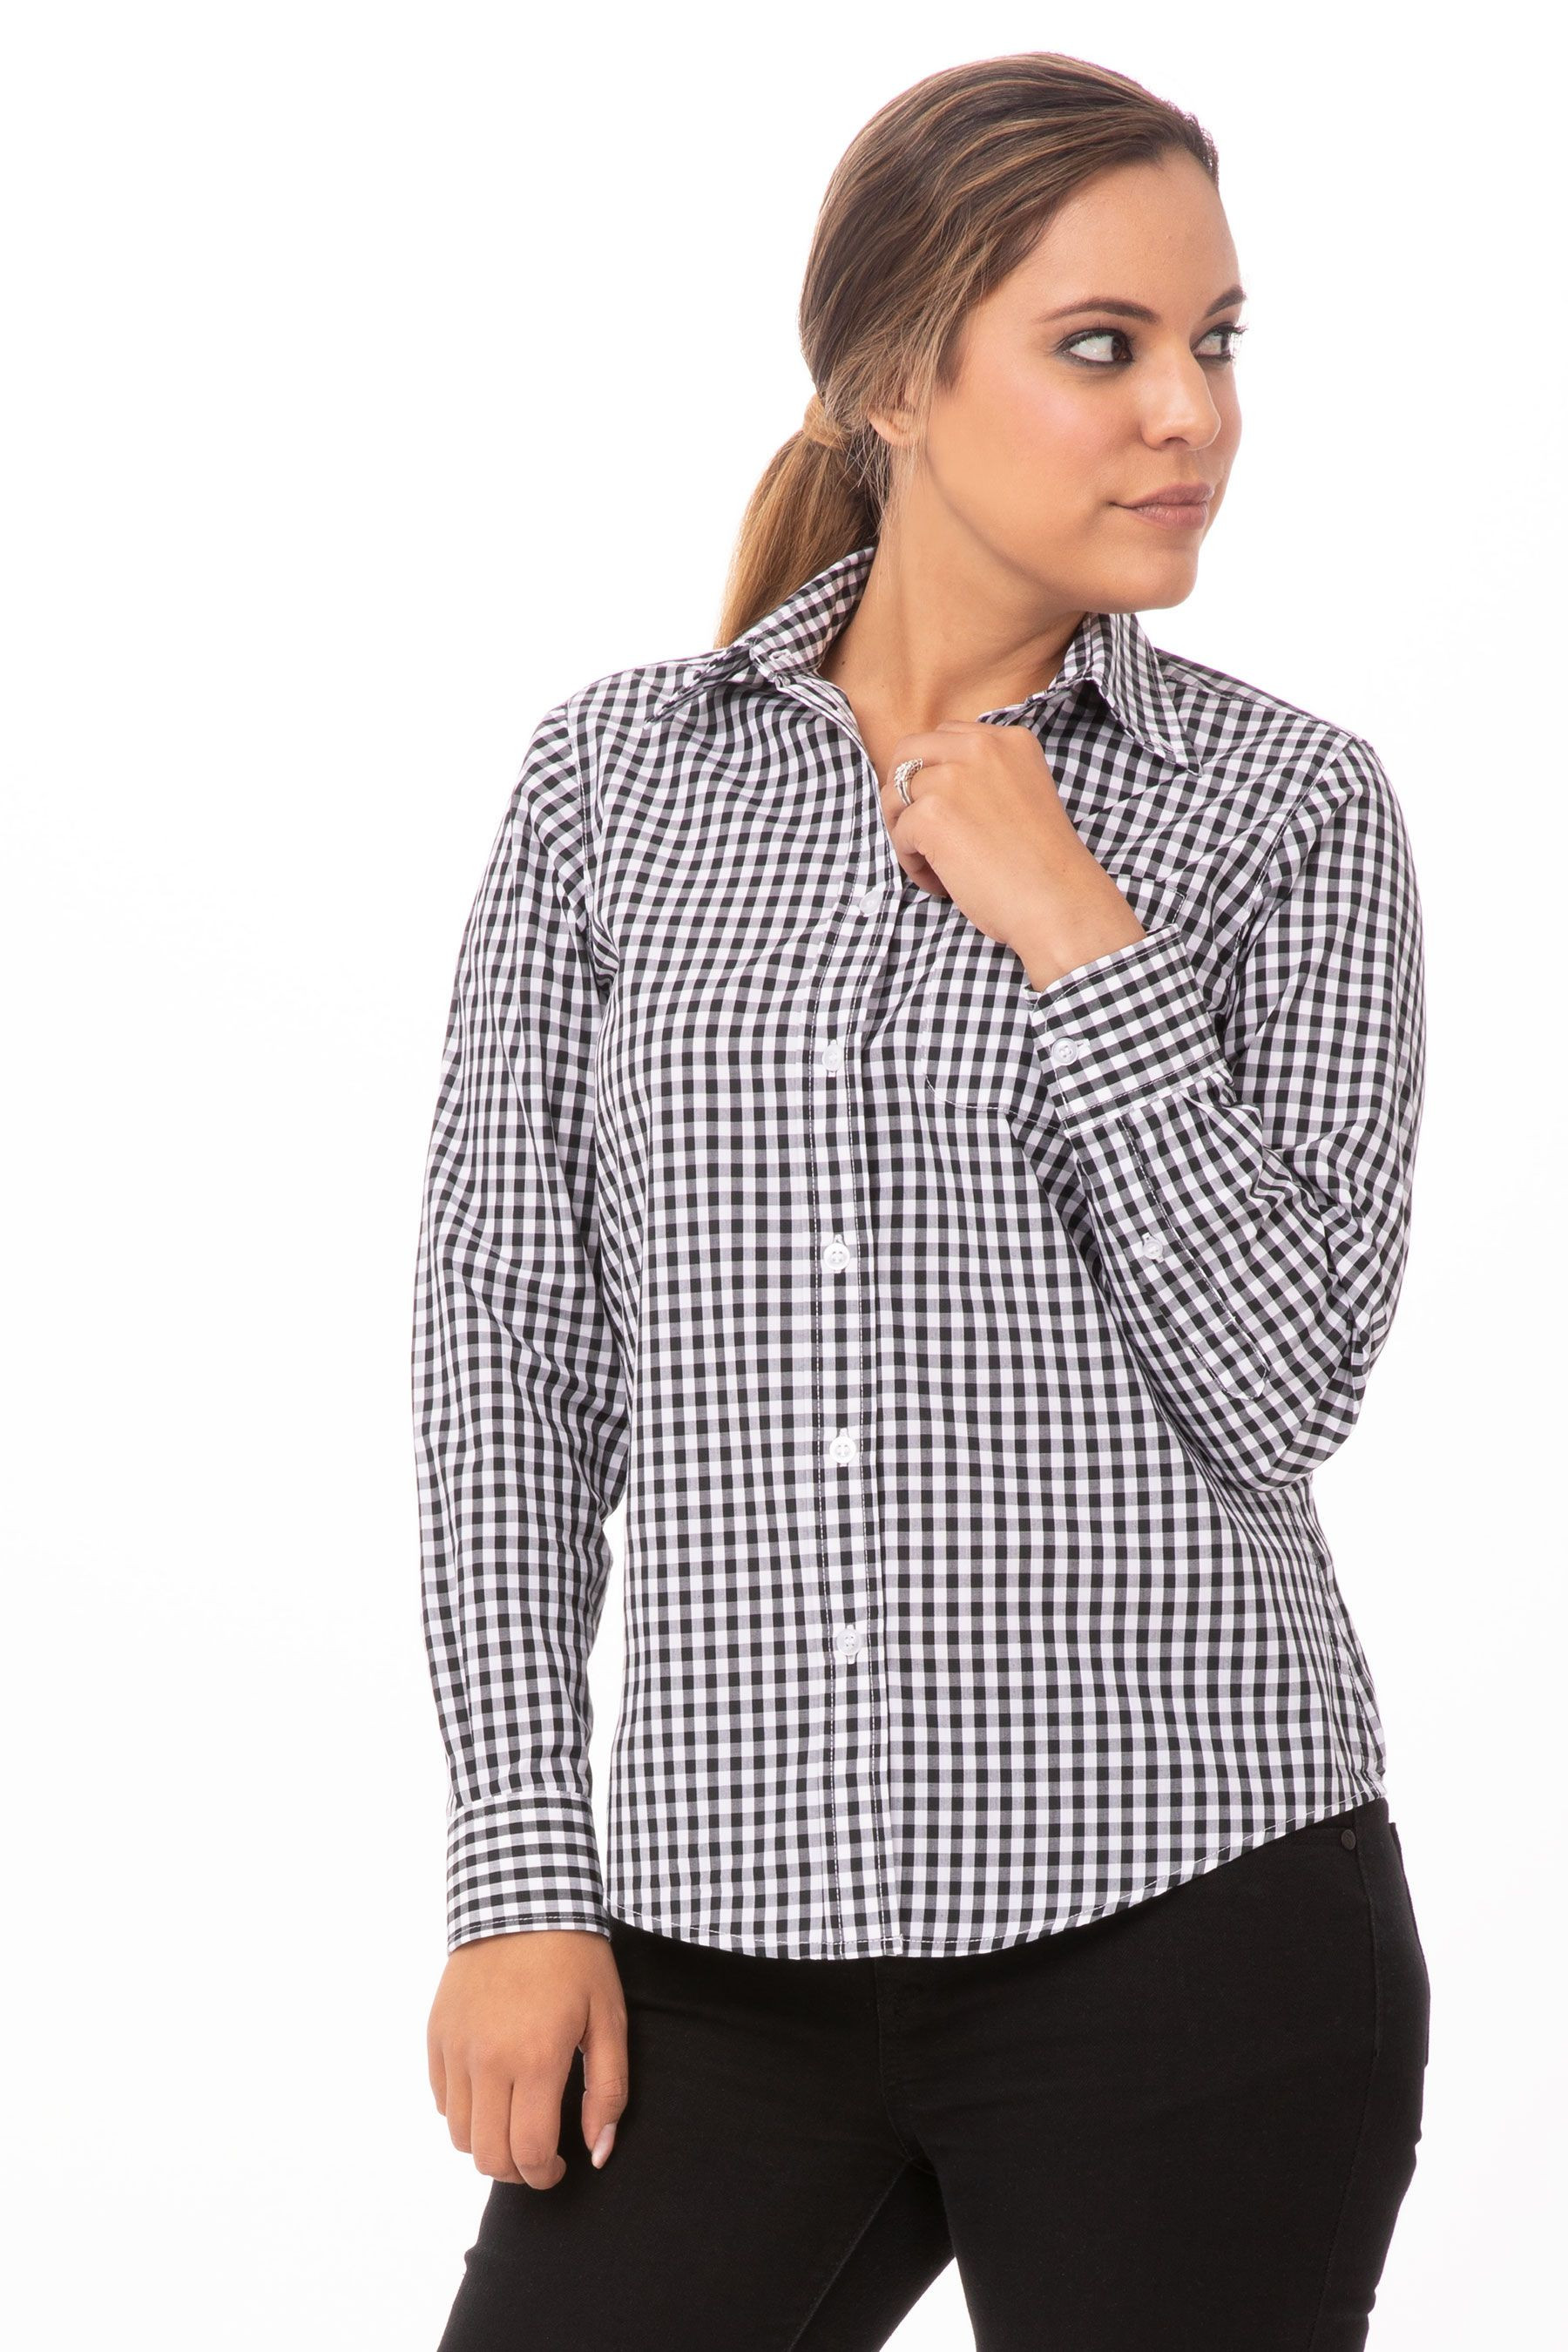 CAMISOLA MUJER GRIS